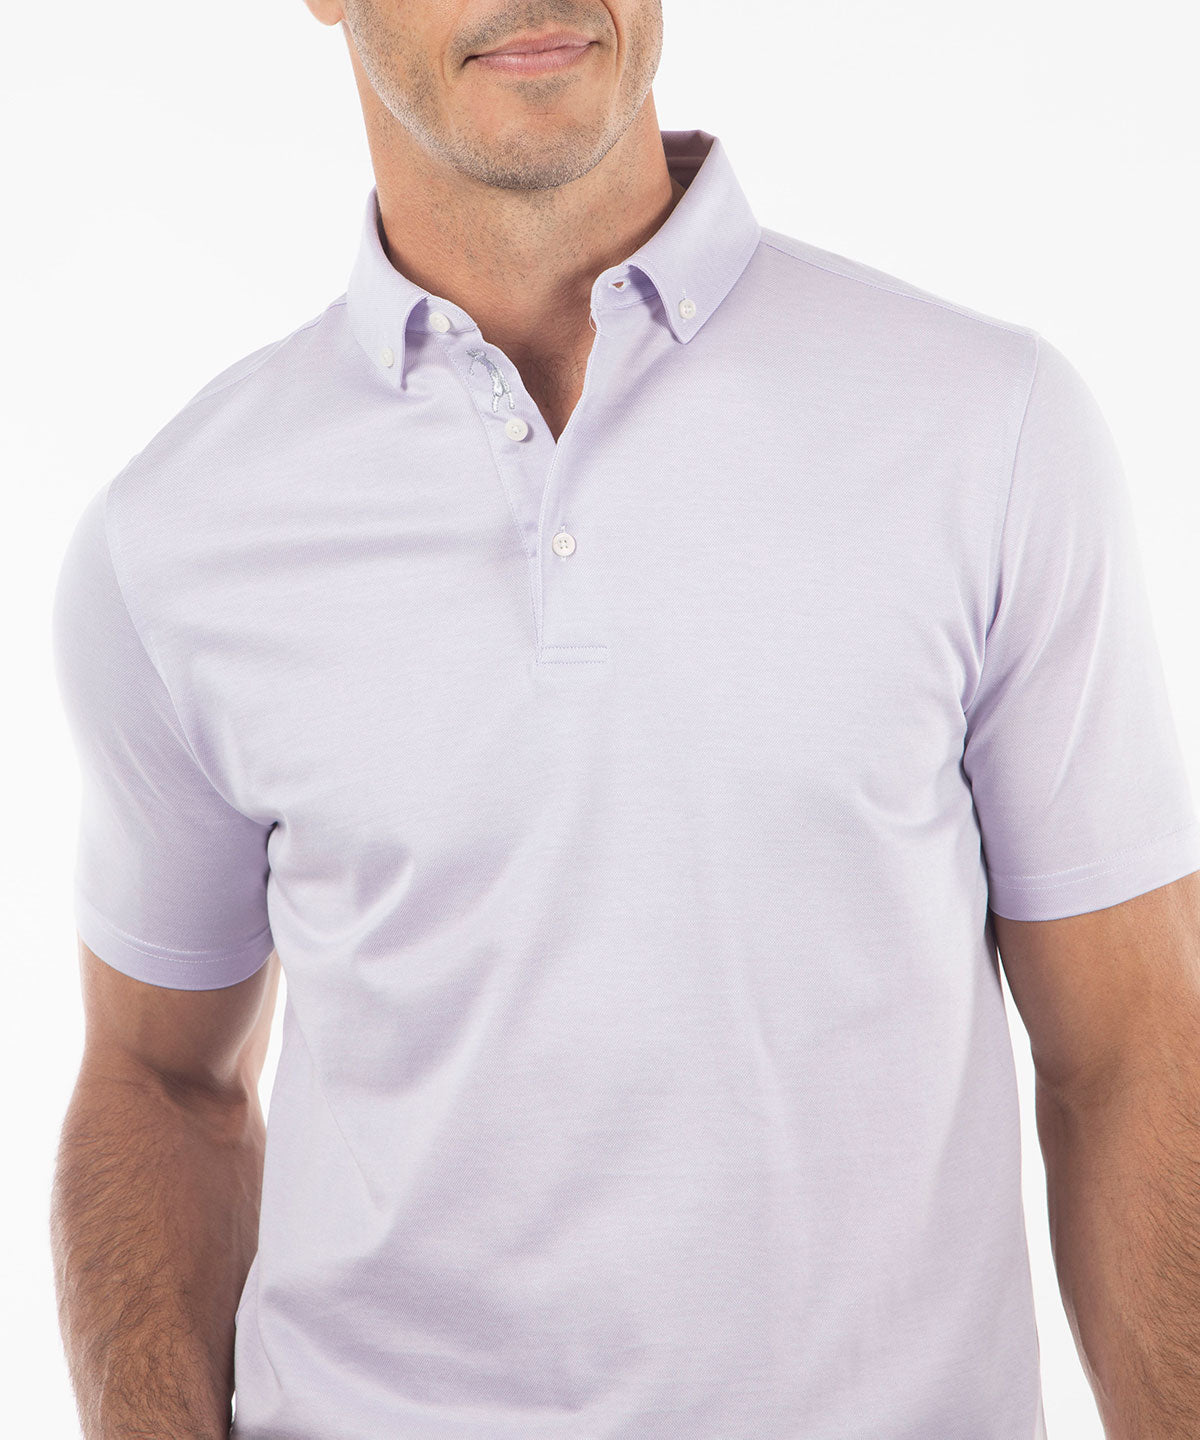 Cotton Shirt with Button-Down Collar